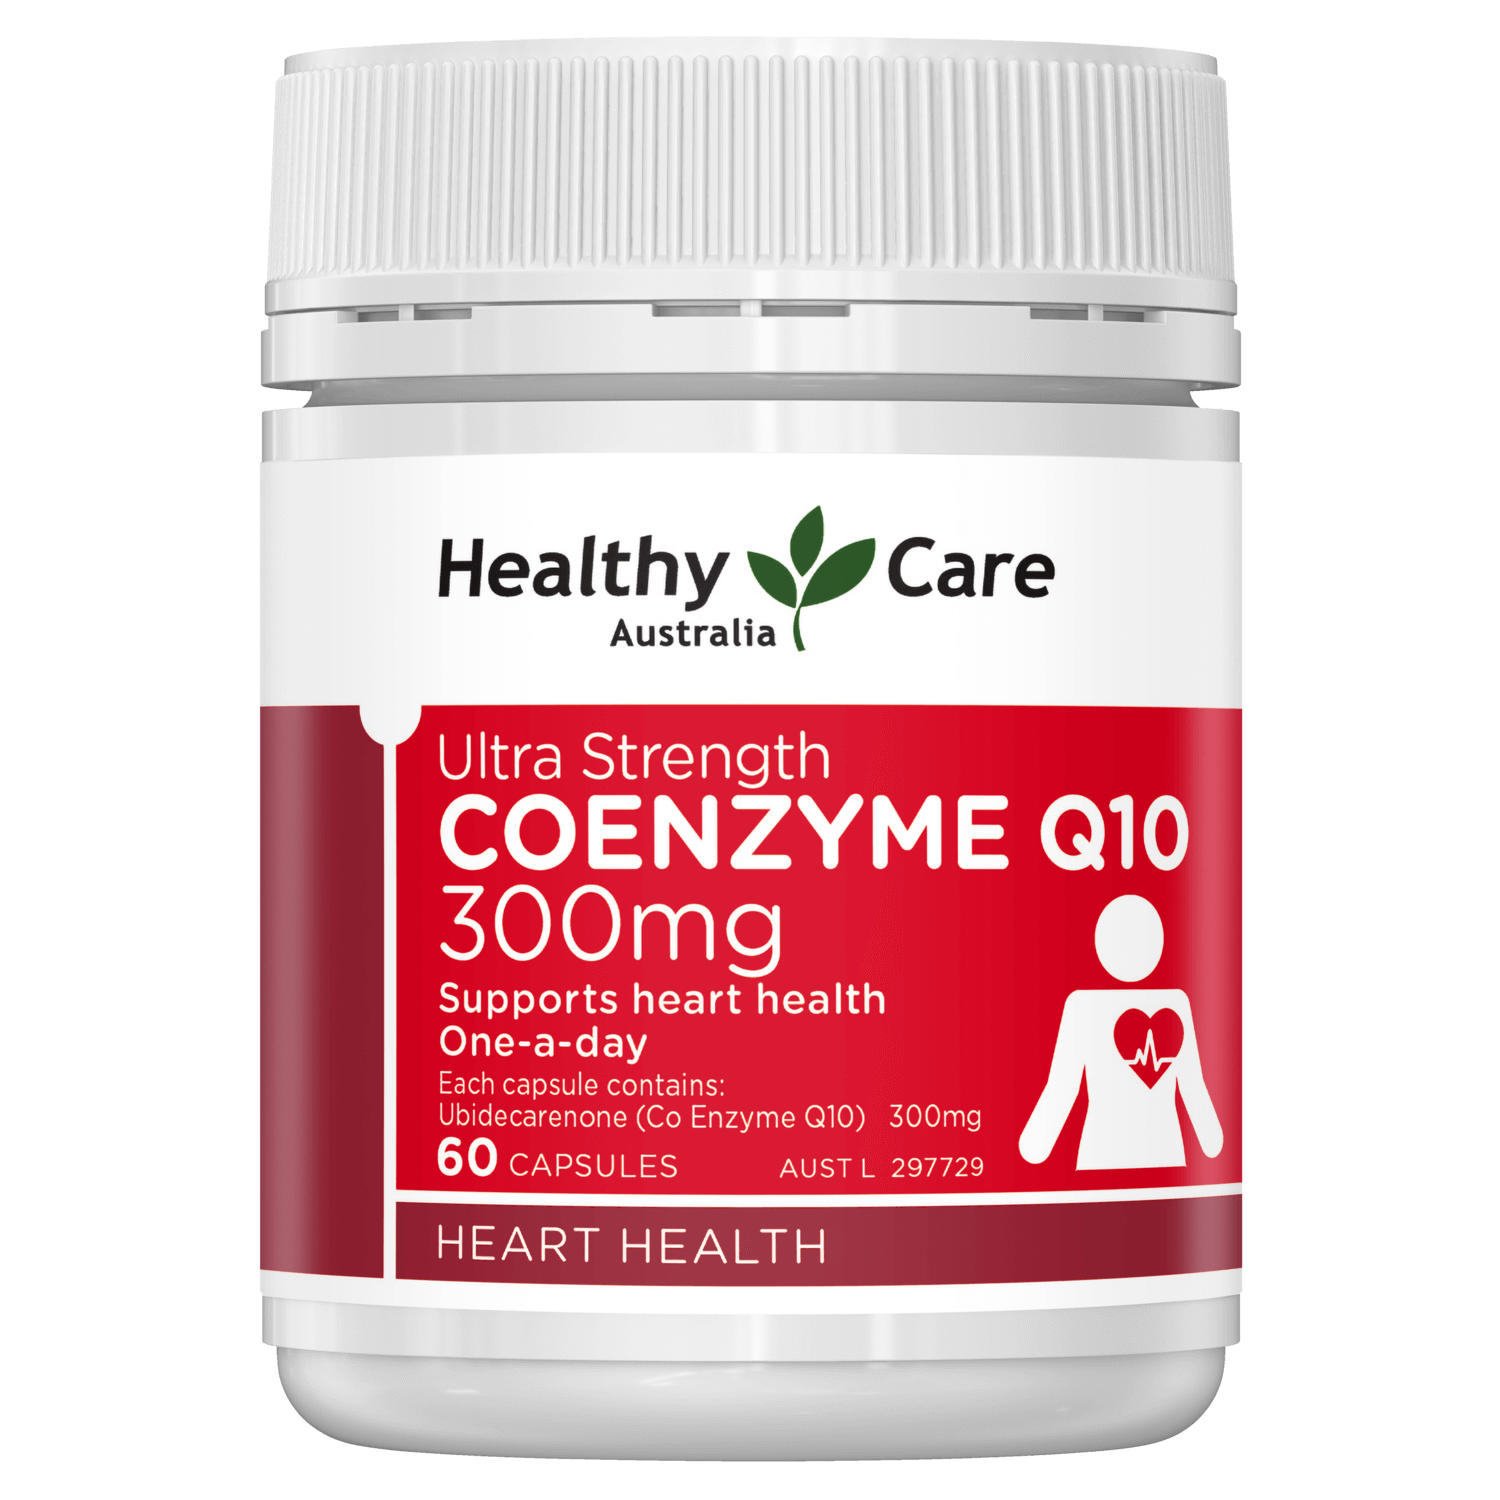 Healthy Care Ultra Strength Coenzyme Q10 300mg 60 capsules